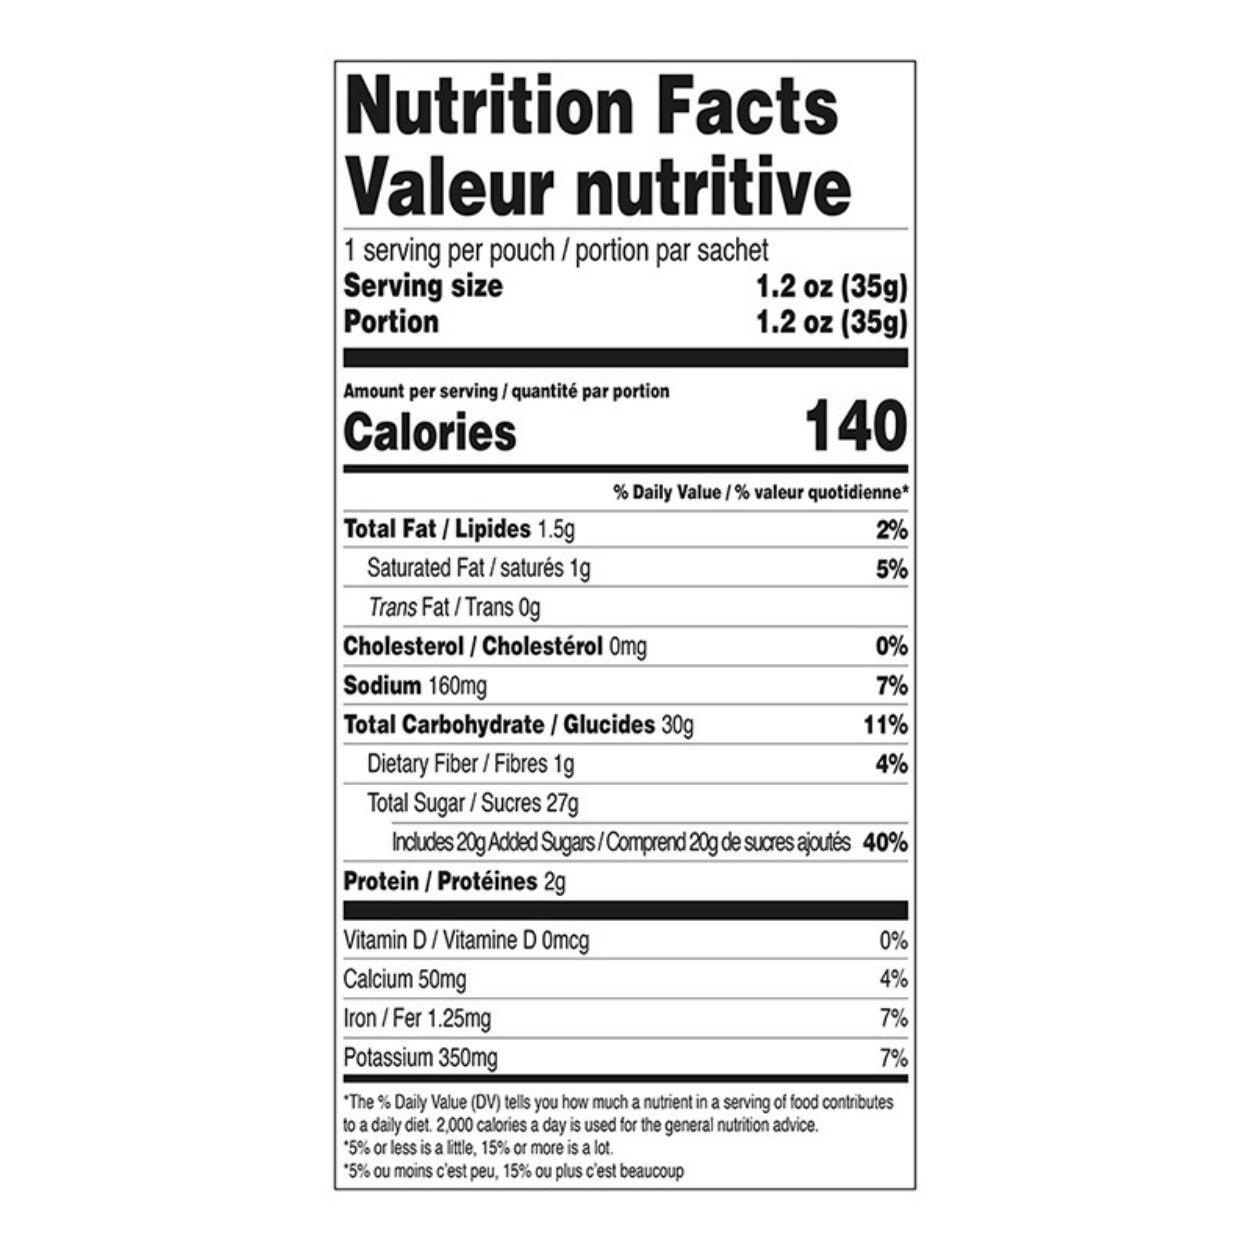 Mini Hot Chocolate Double Truffle- Fox Nutrition Facts Label